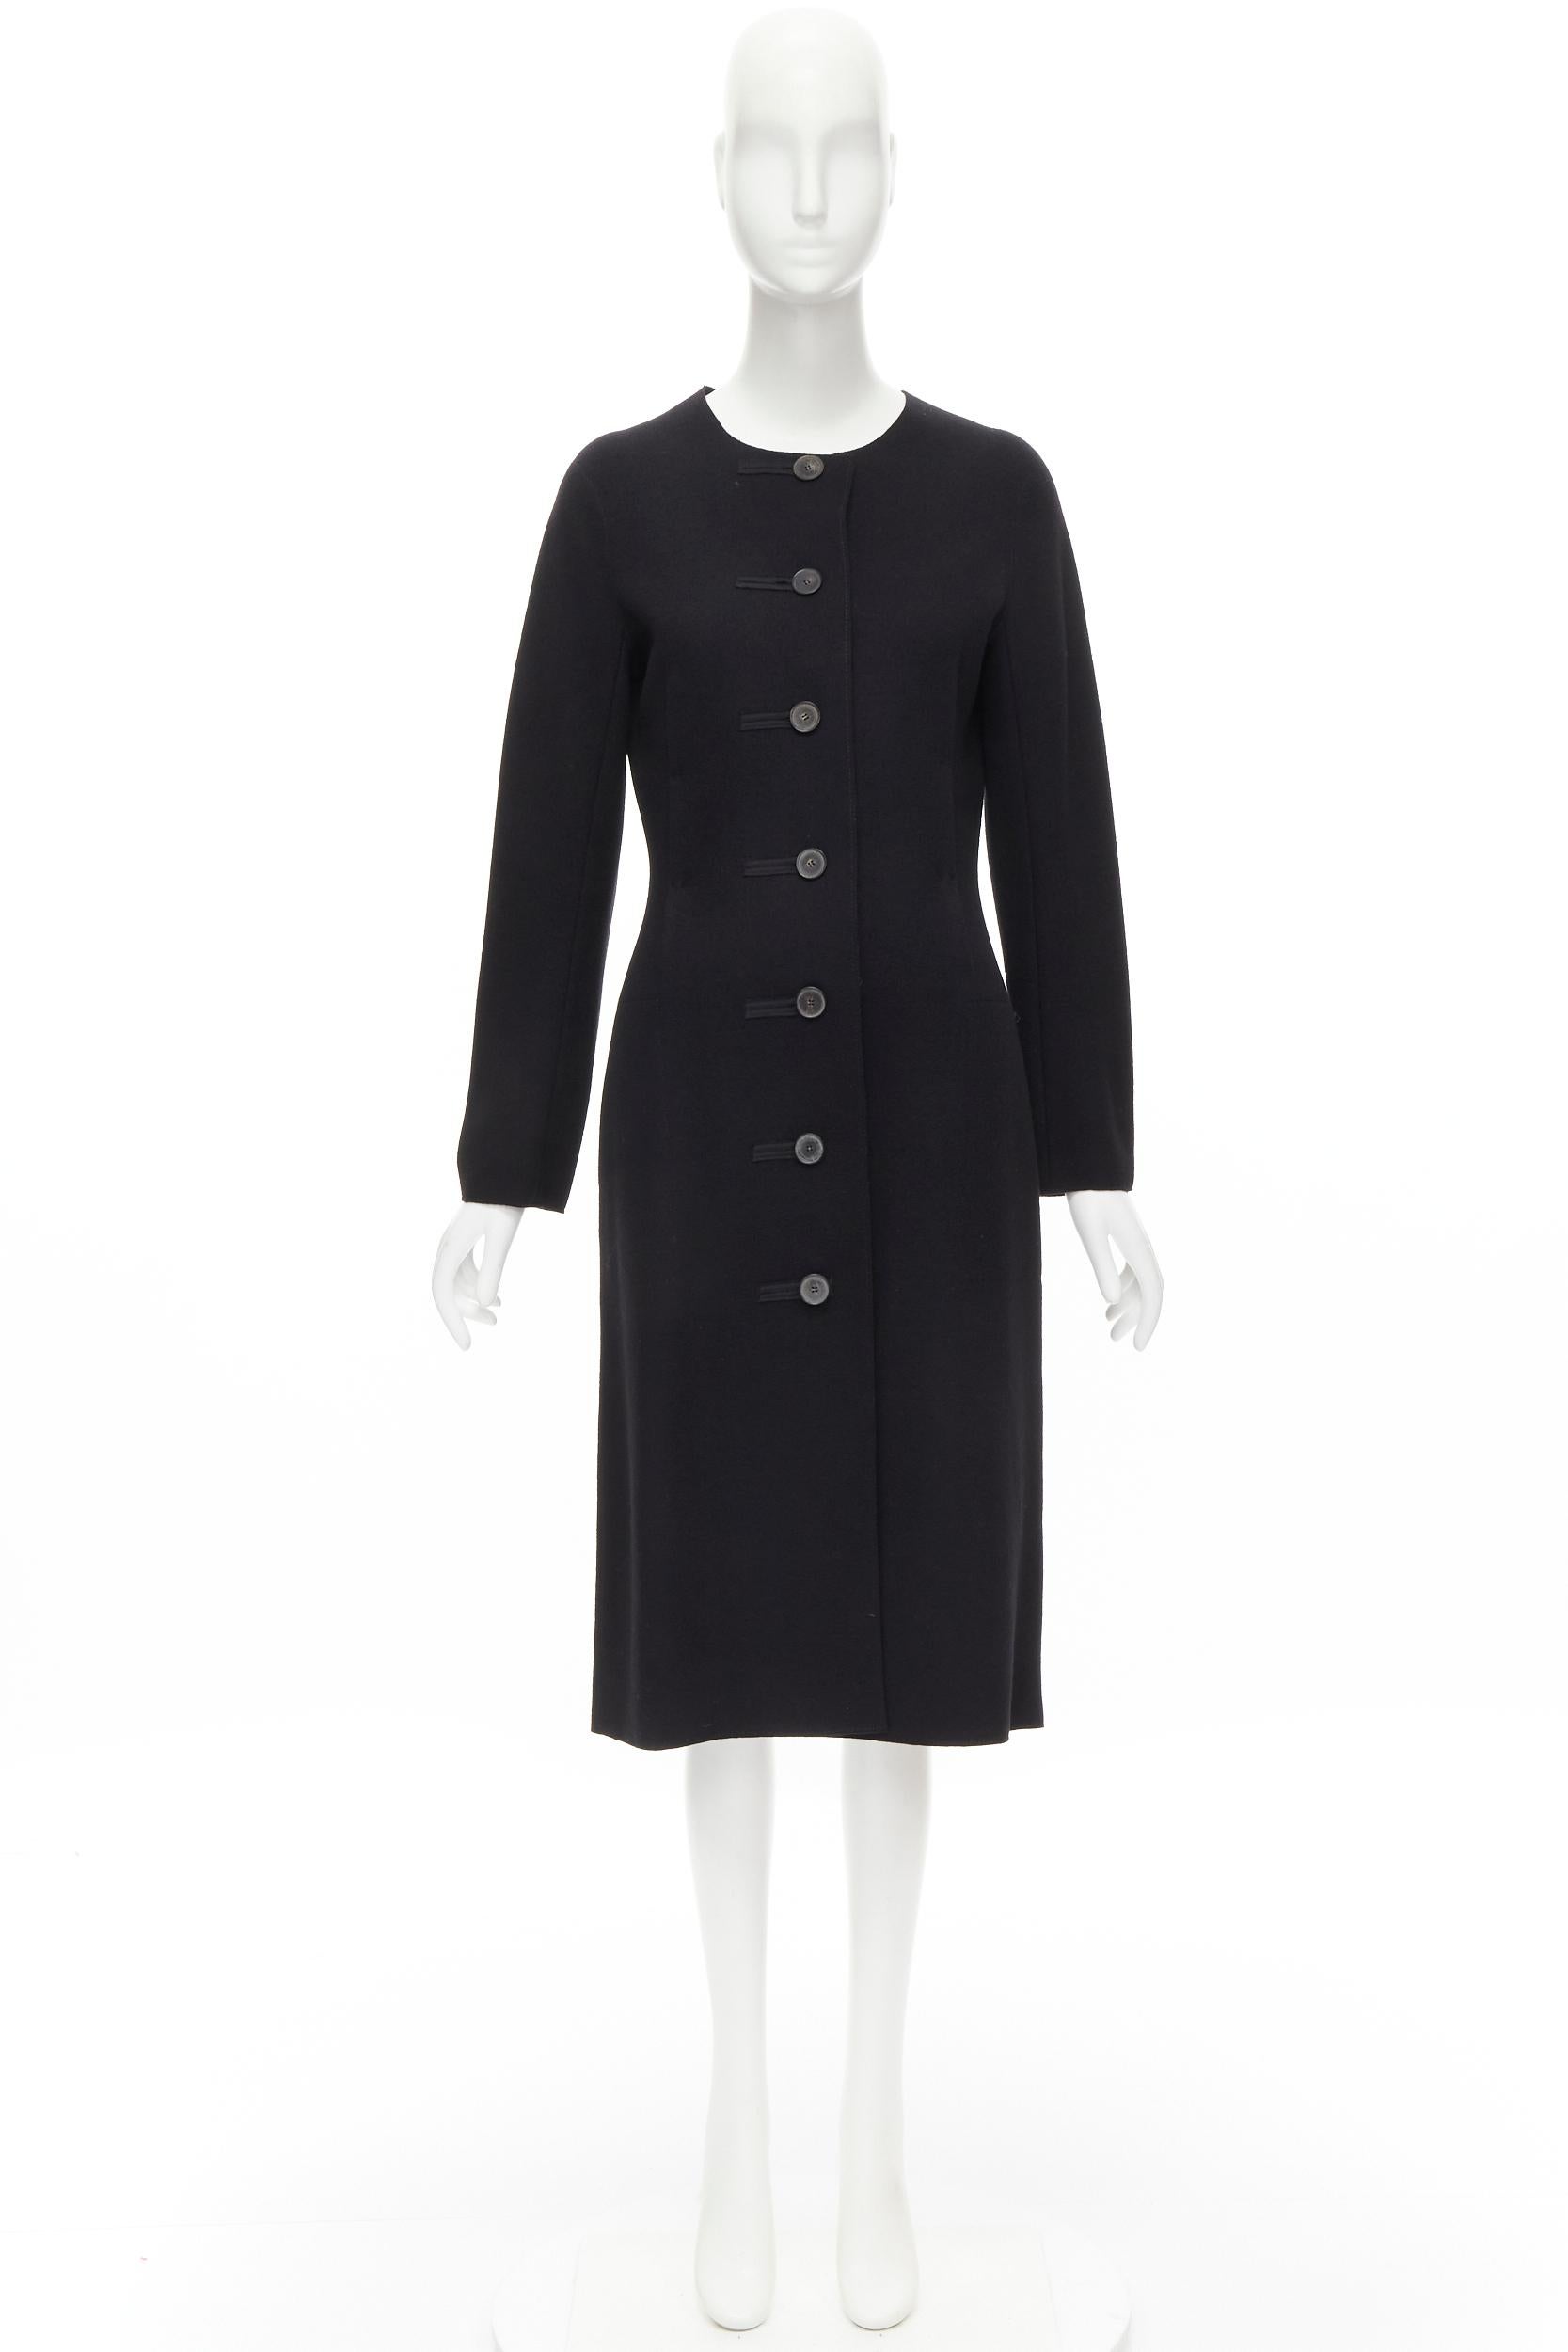 LANVIN Alber Elbaz 2004 black wool pinched darts button front fitted coat FR38 S For Sale 7